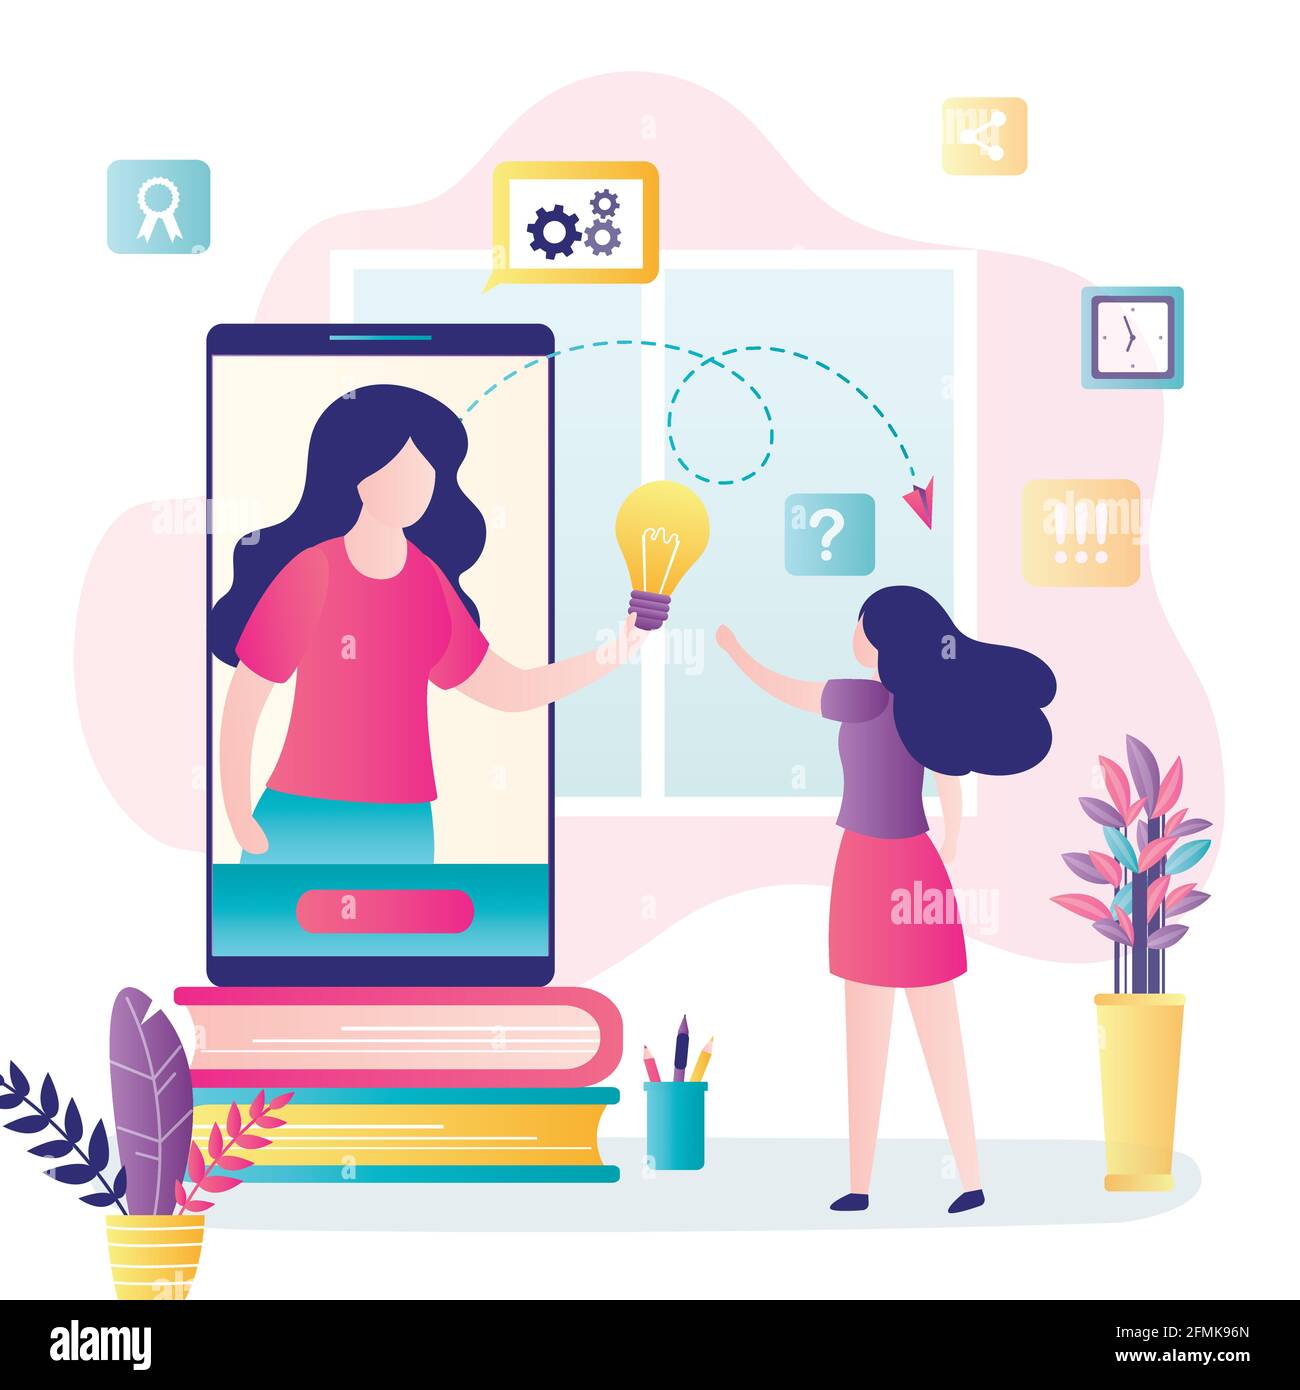 E-learning, online education or home schooling. Girl student gets new knowledge and ideas. Mobile phone with courses or tutorials. Education concept. Stock Vector